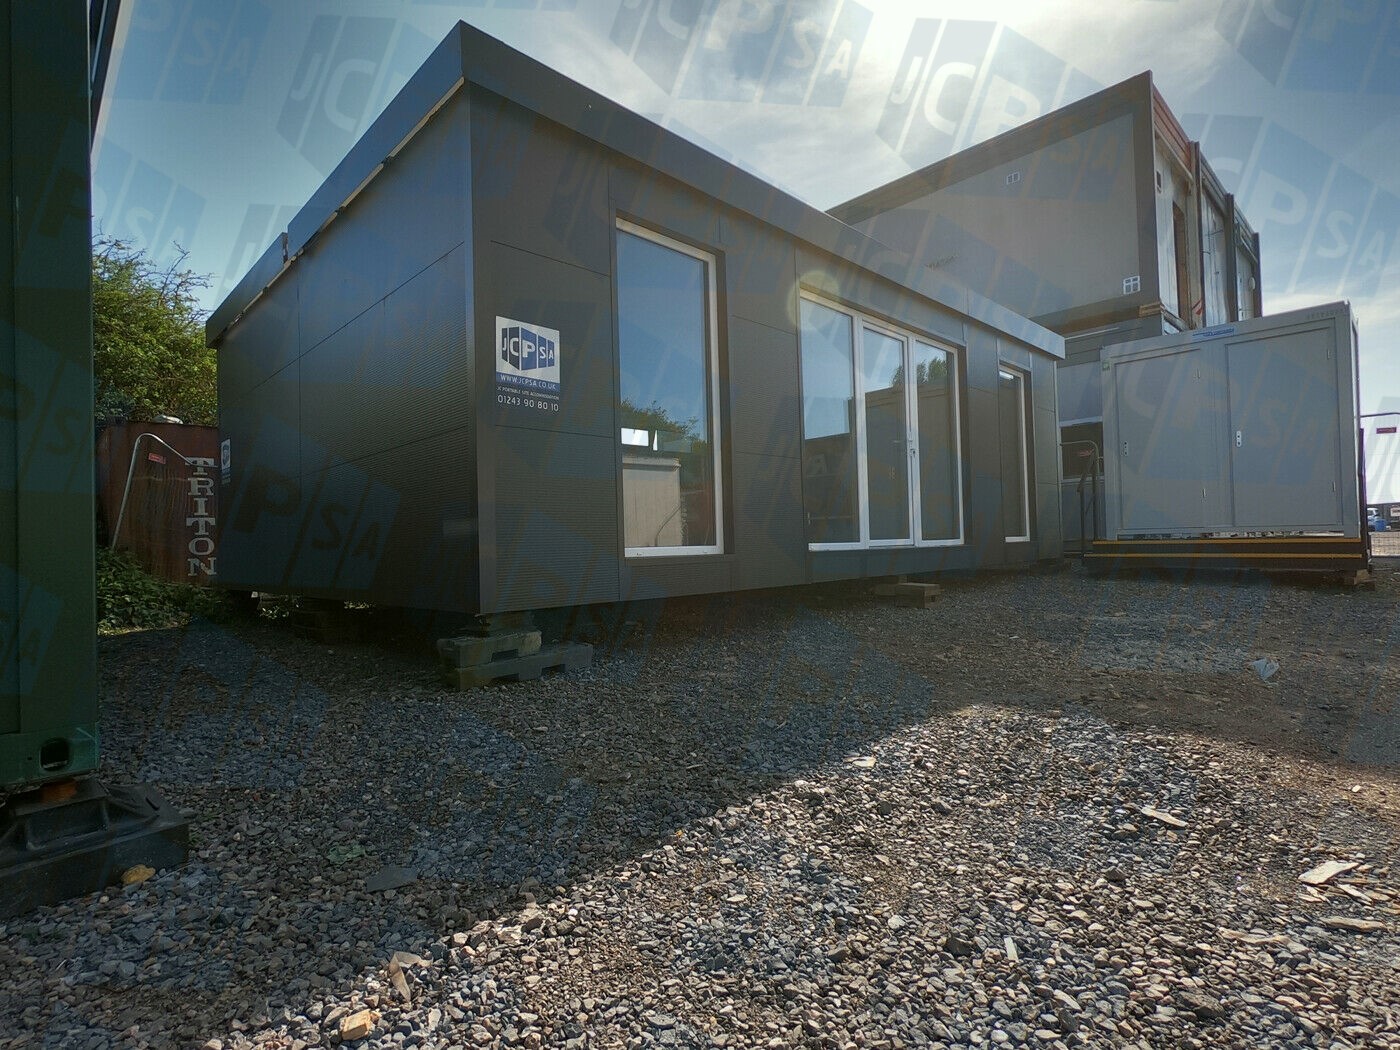 28ft X 20ft Two Bay Modular Building Portable Office, Sales Unit